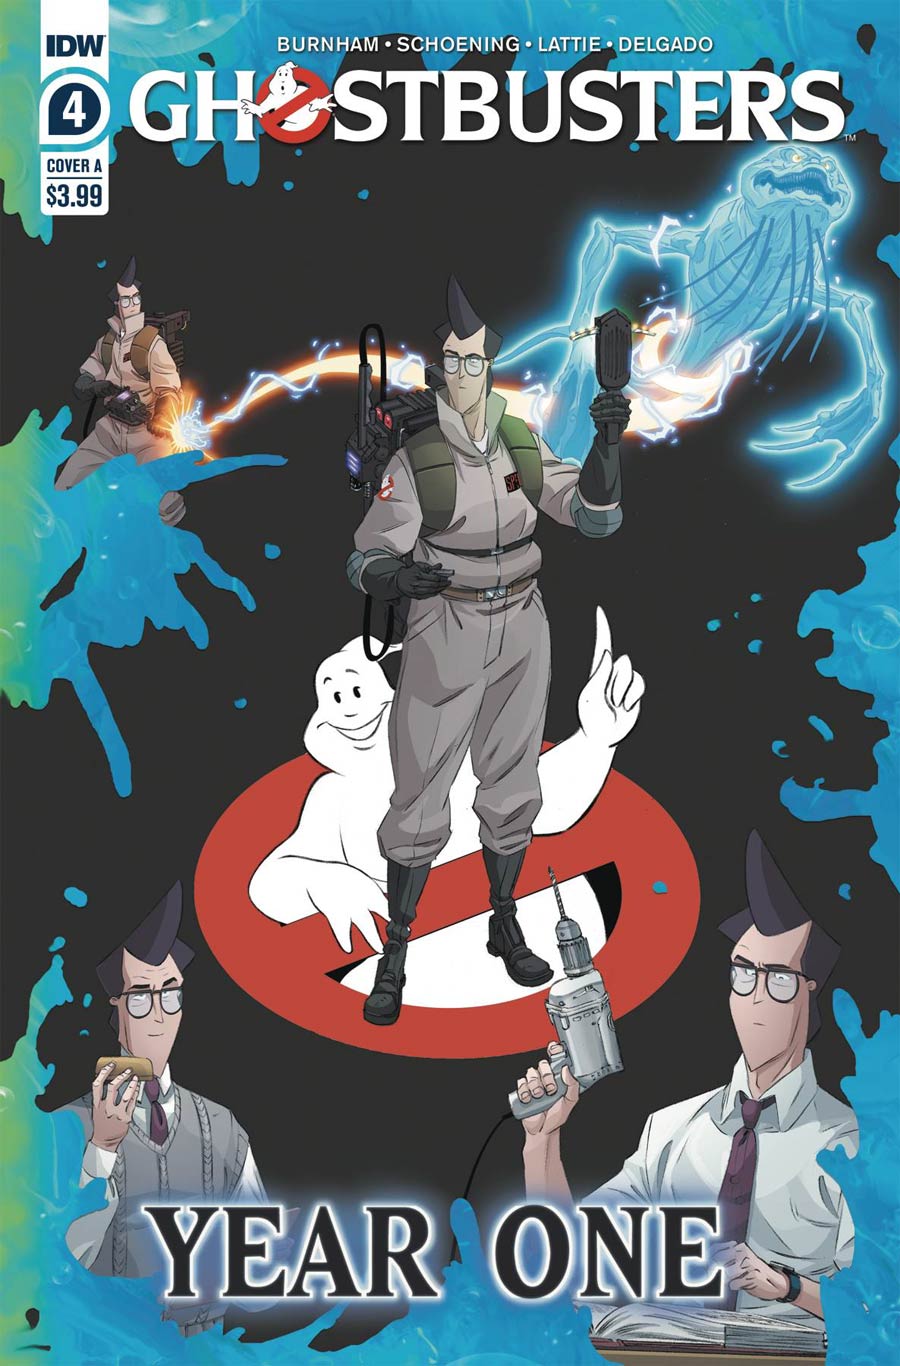 Ghostbusters Year One #4 Cover A Regular Dan Schoening Cover